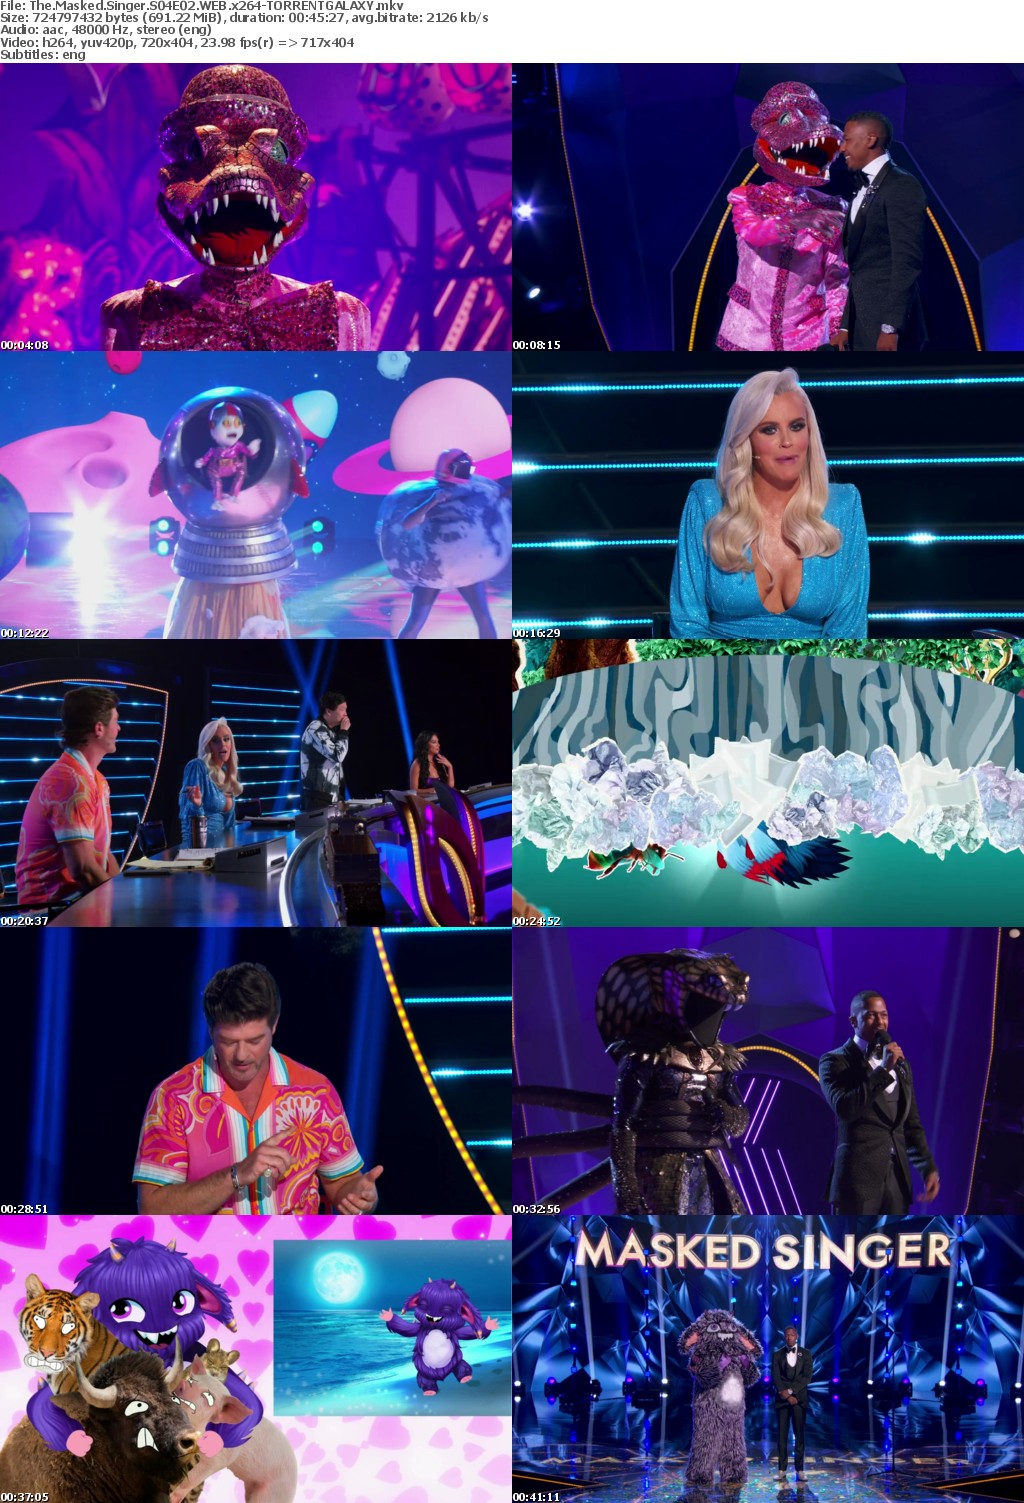 The Masked Singer S04E02 WEB x264-GALAXY